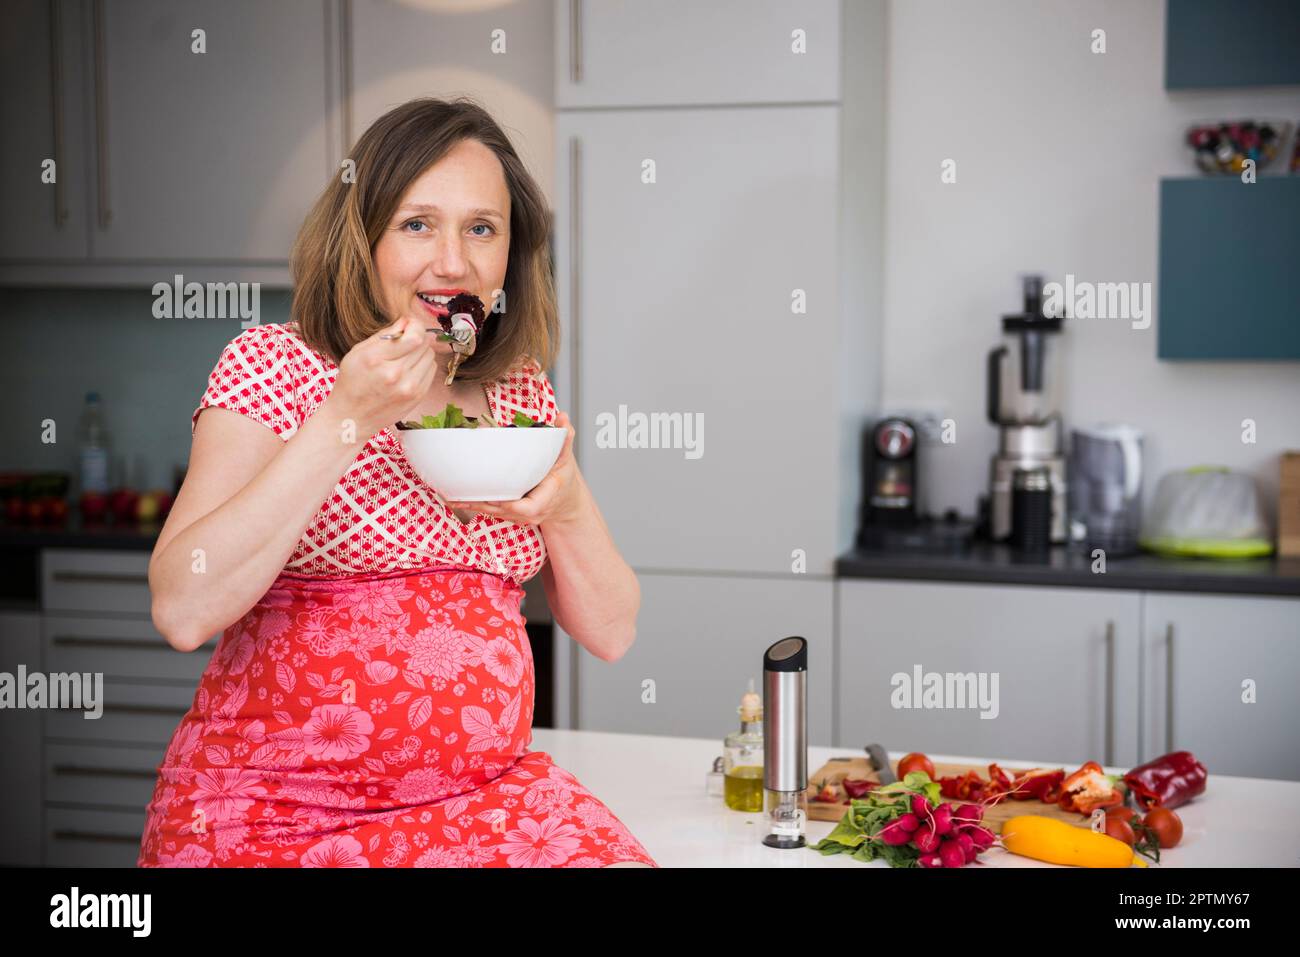 Portrait of a pregnant woman eating salad in the kitchen, Munich, Bavaria, Germany Stock Photo